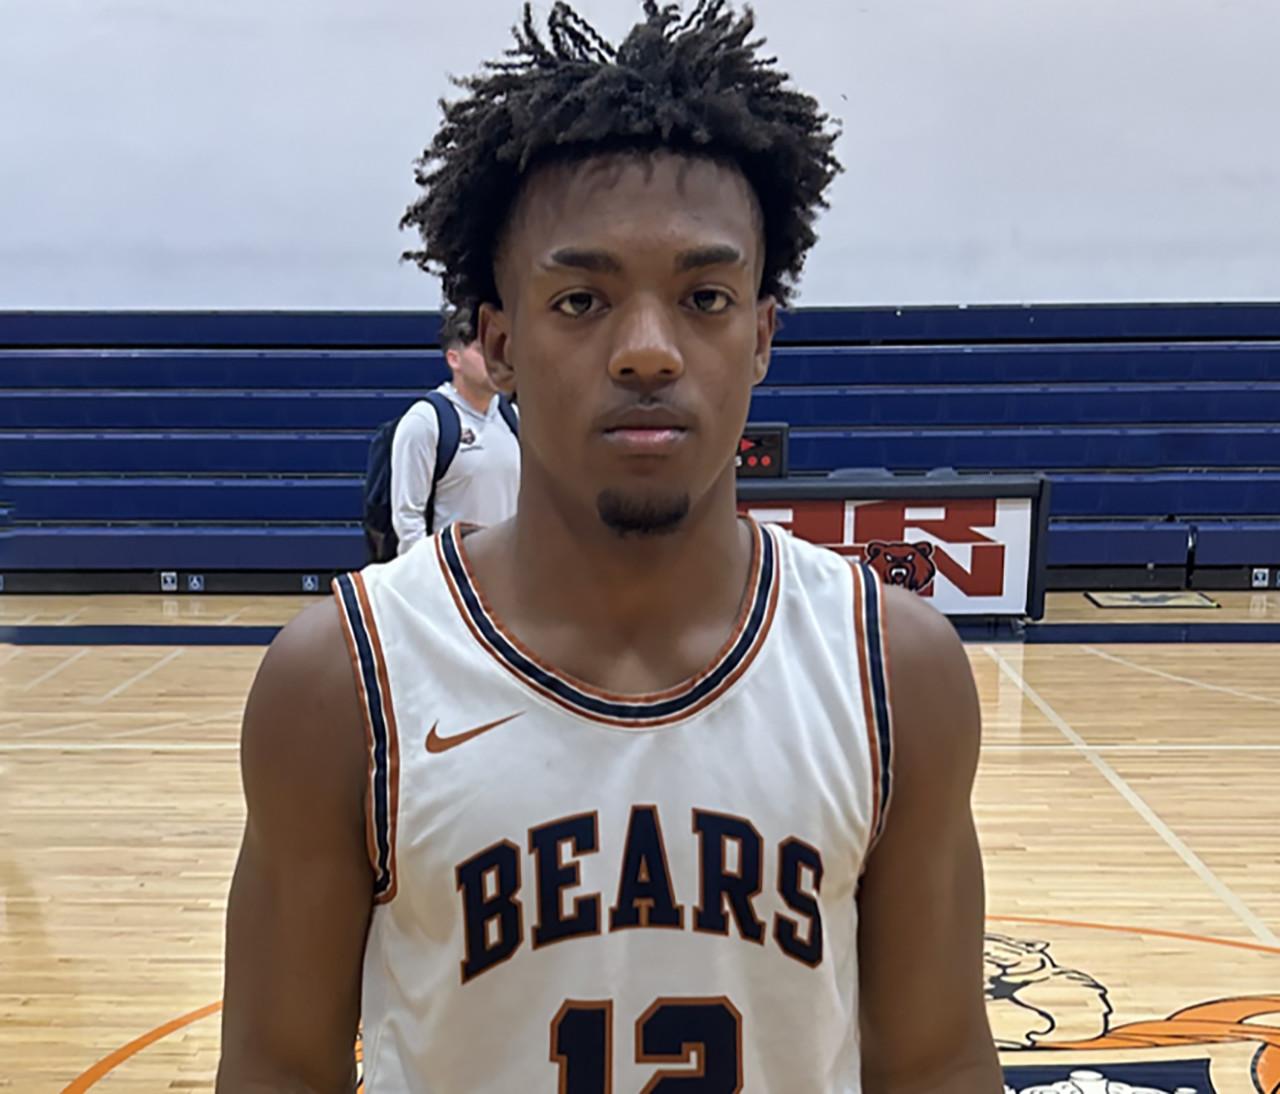 The defensive pressure of sophomore Anthony Knowles allowed Mater Lakes overcome a rough shooting start and cruise to an 87-43 win over Miami Christian. It was the Bears 19th win of the season.